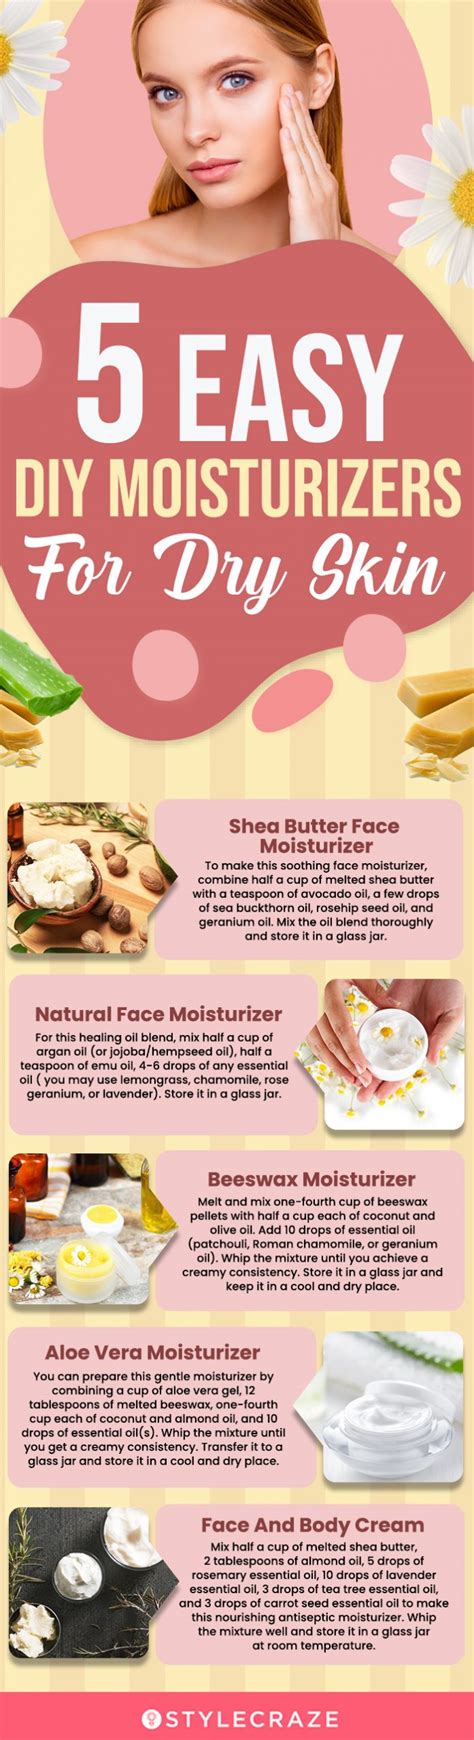 11 Simple Homemade Moisturizers For Dry Skin